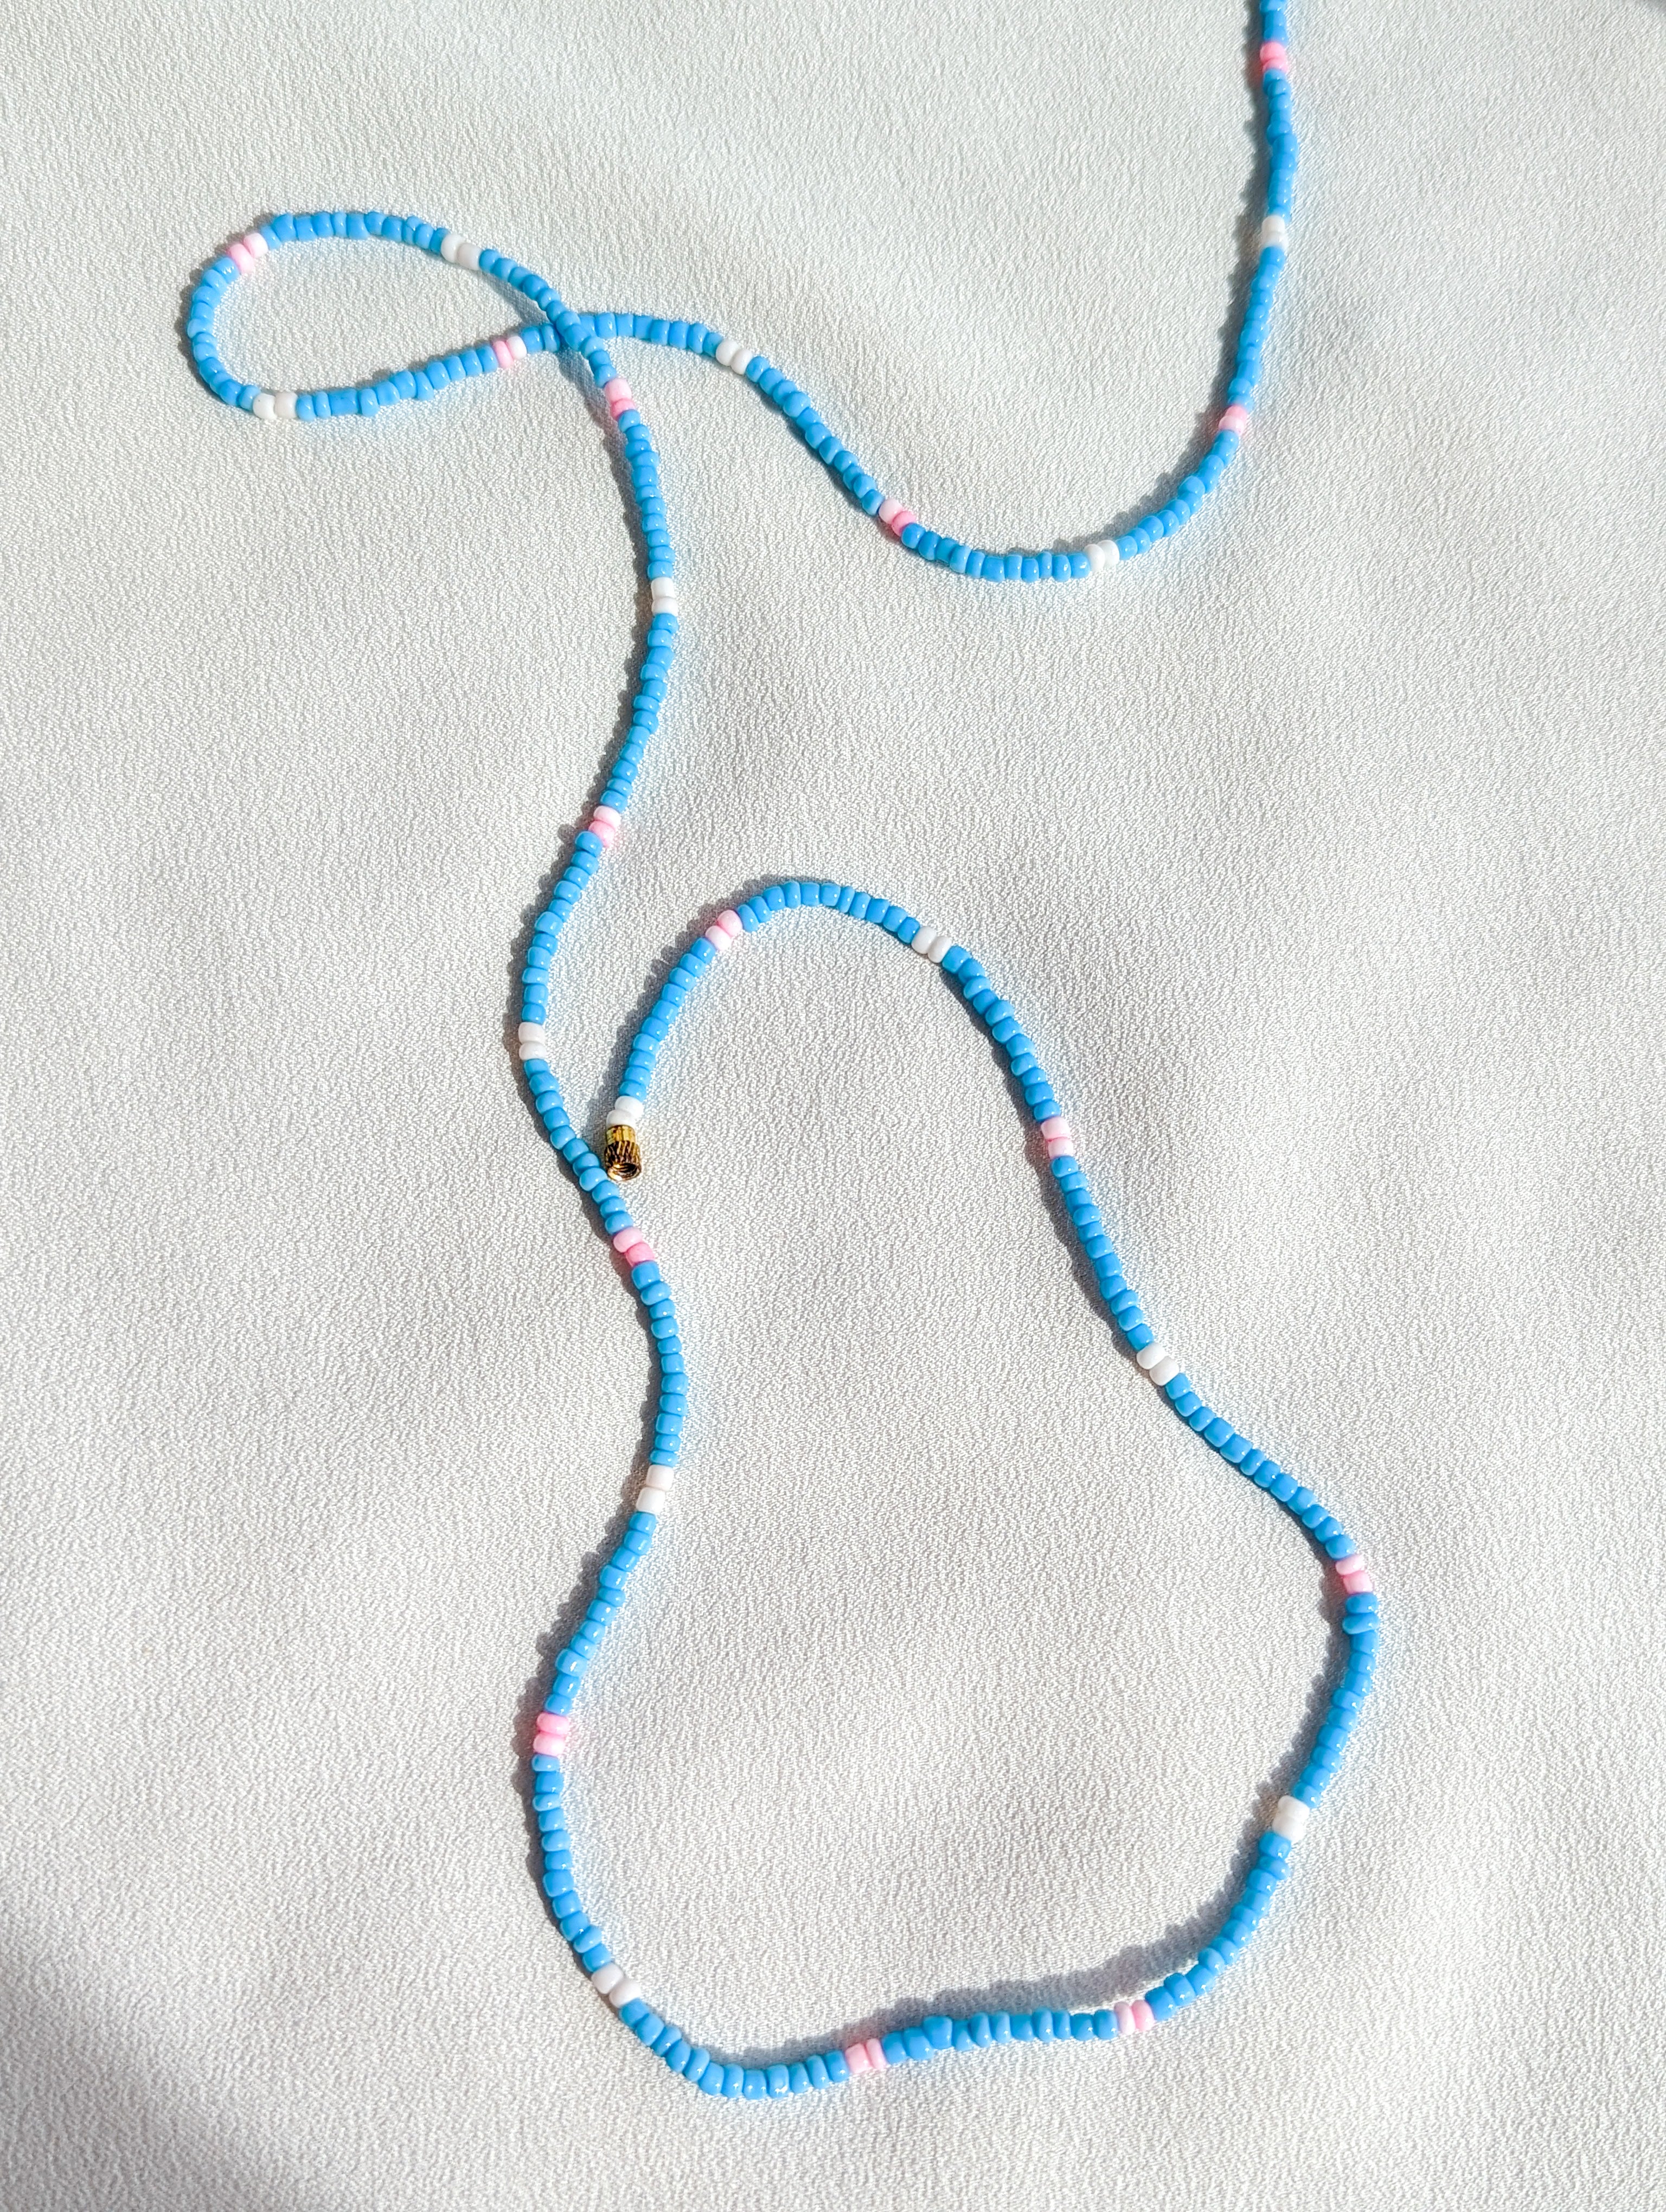 [THE ELEVEN] Belly Chain: Blue/White + Pink [Small Beads]